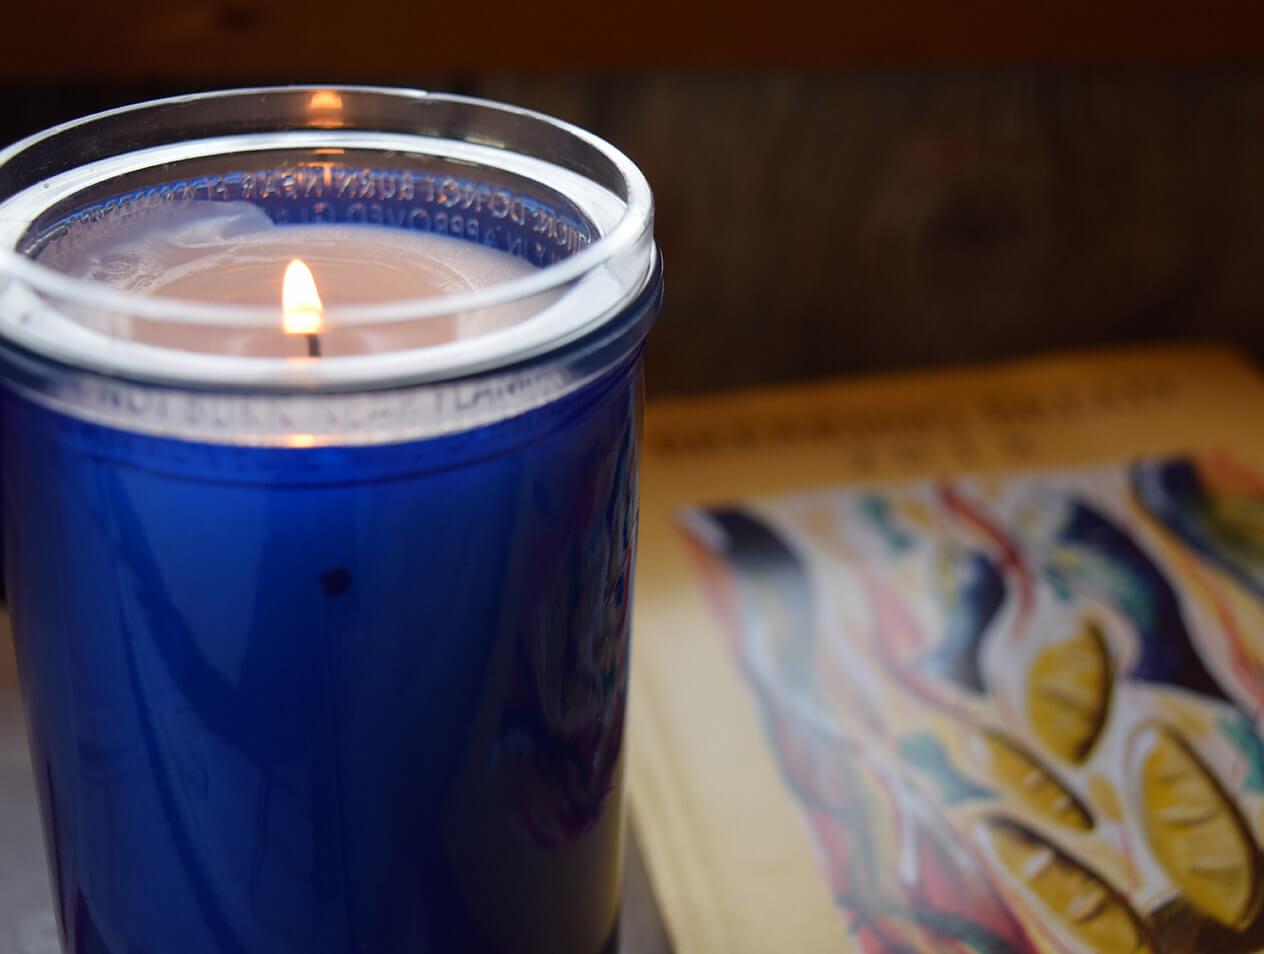 A candle and a Christian spirituality book